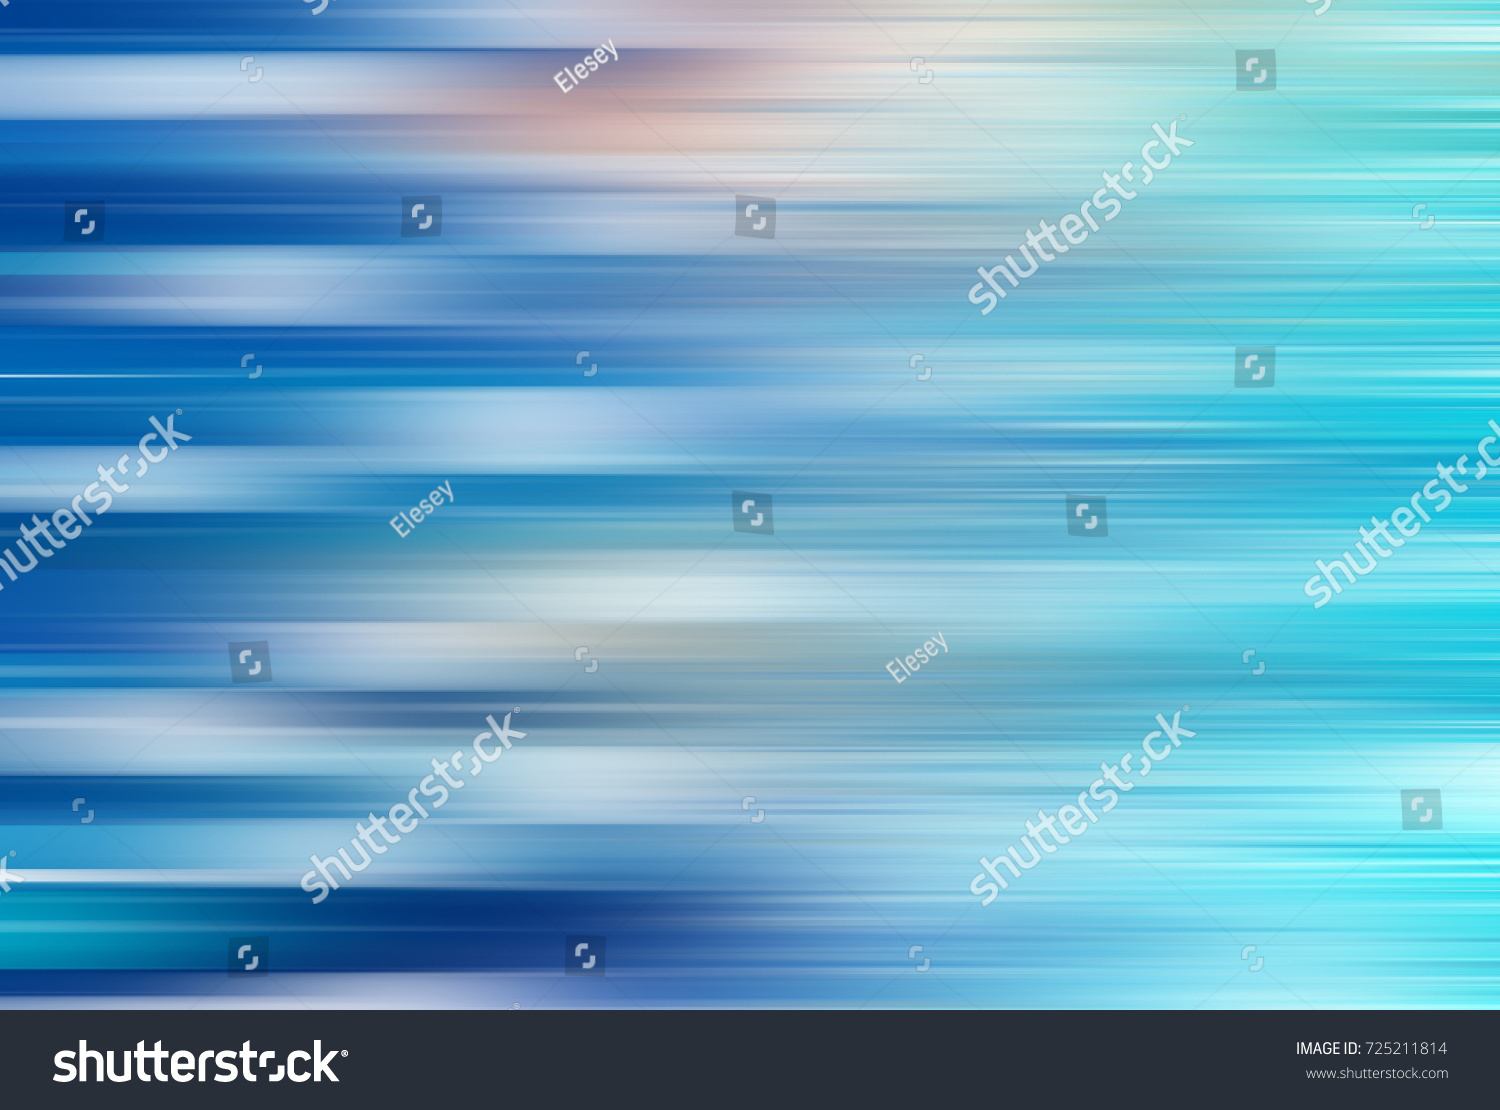 Abstract Blue Background Horizontal Lines Stock Illustration 725211814 ...